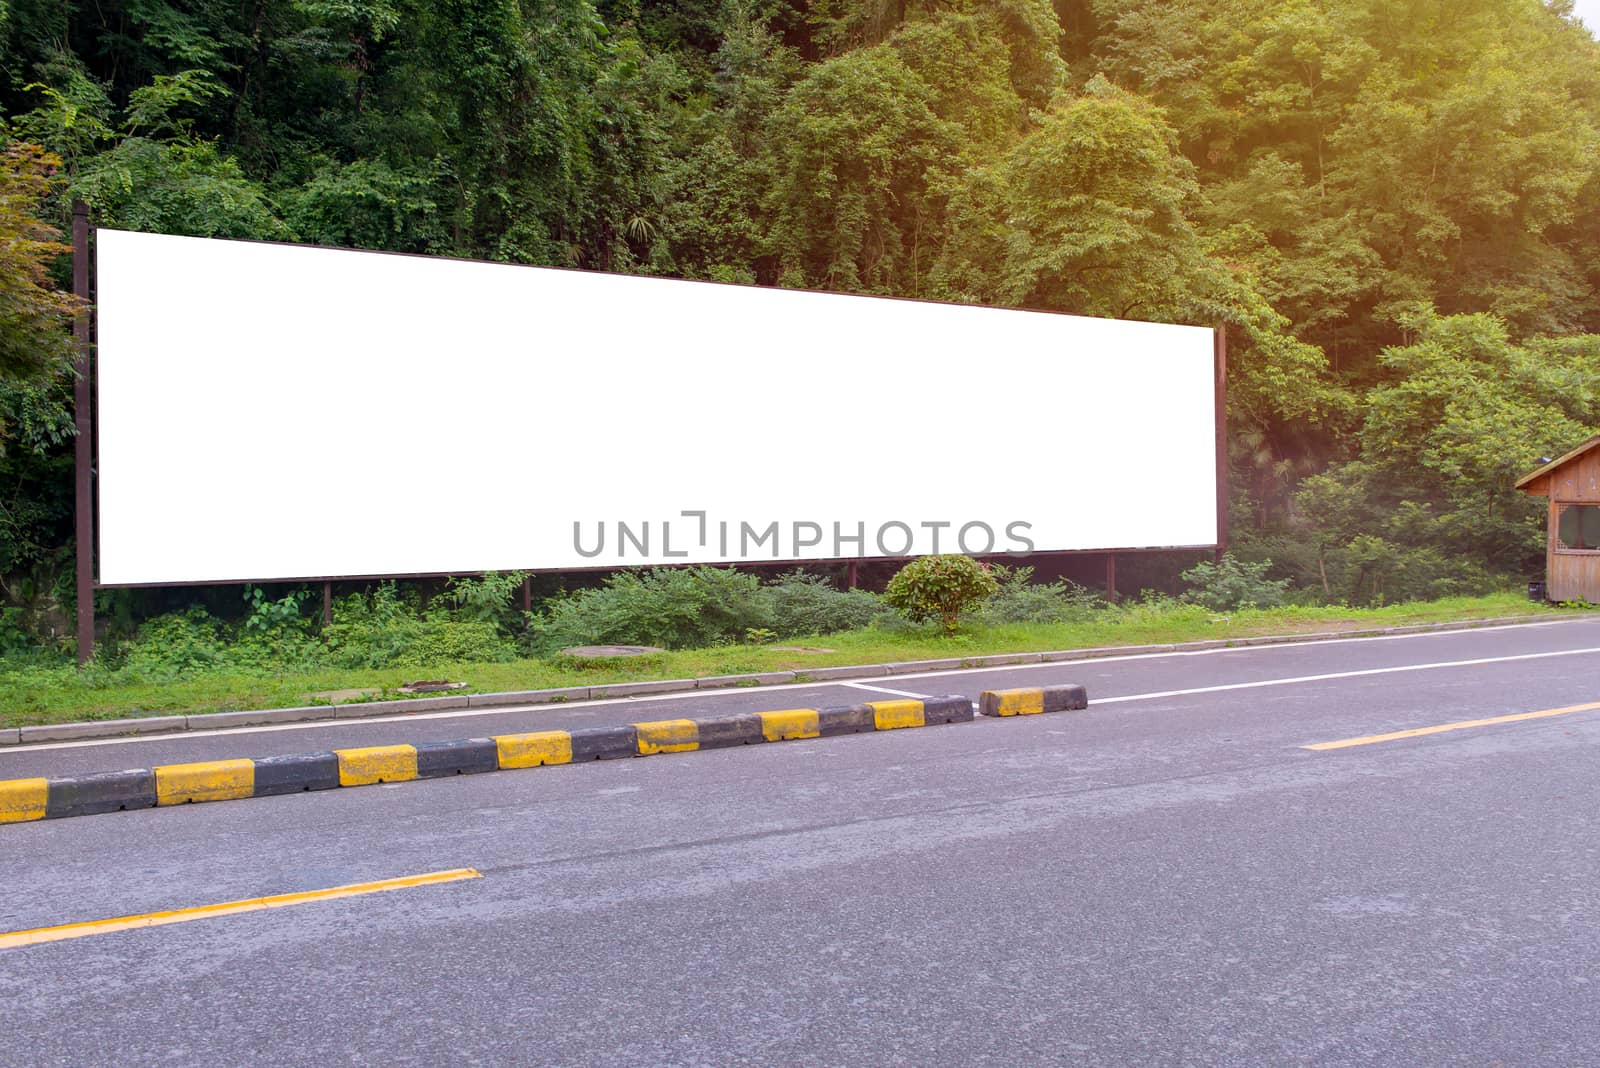 blank billboard ready for new advertisement at green park zone.